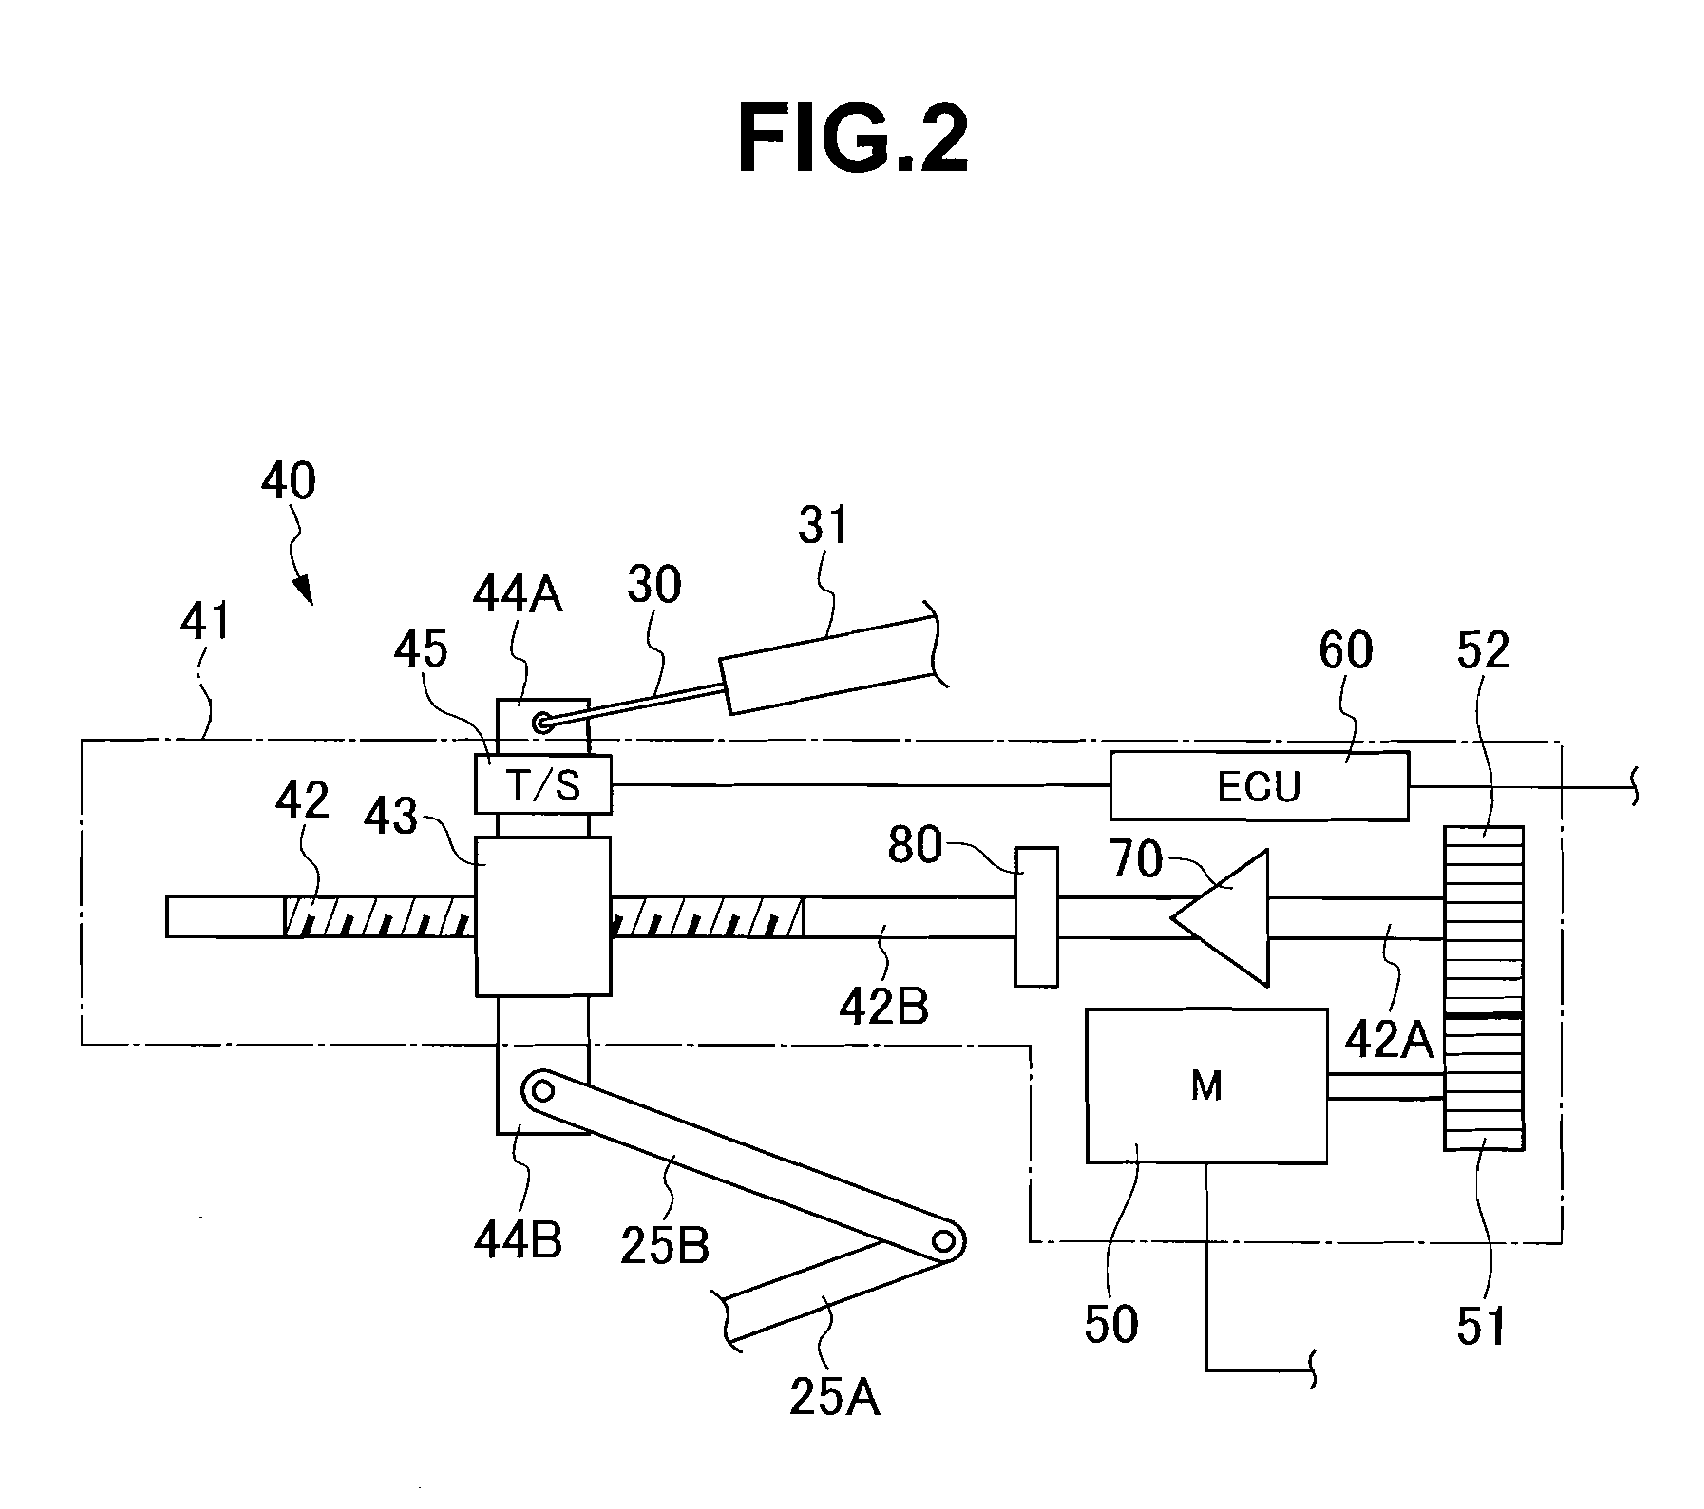 Power steering apparatus of watercraft with propeller